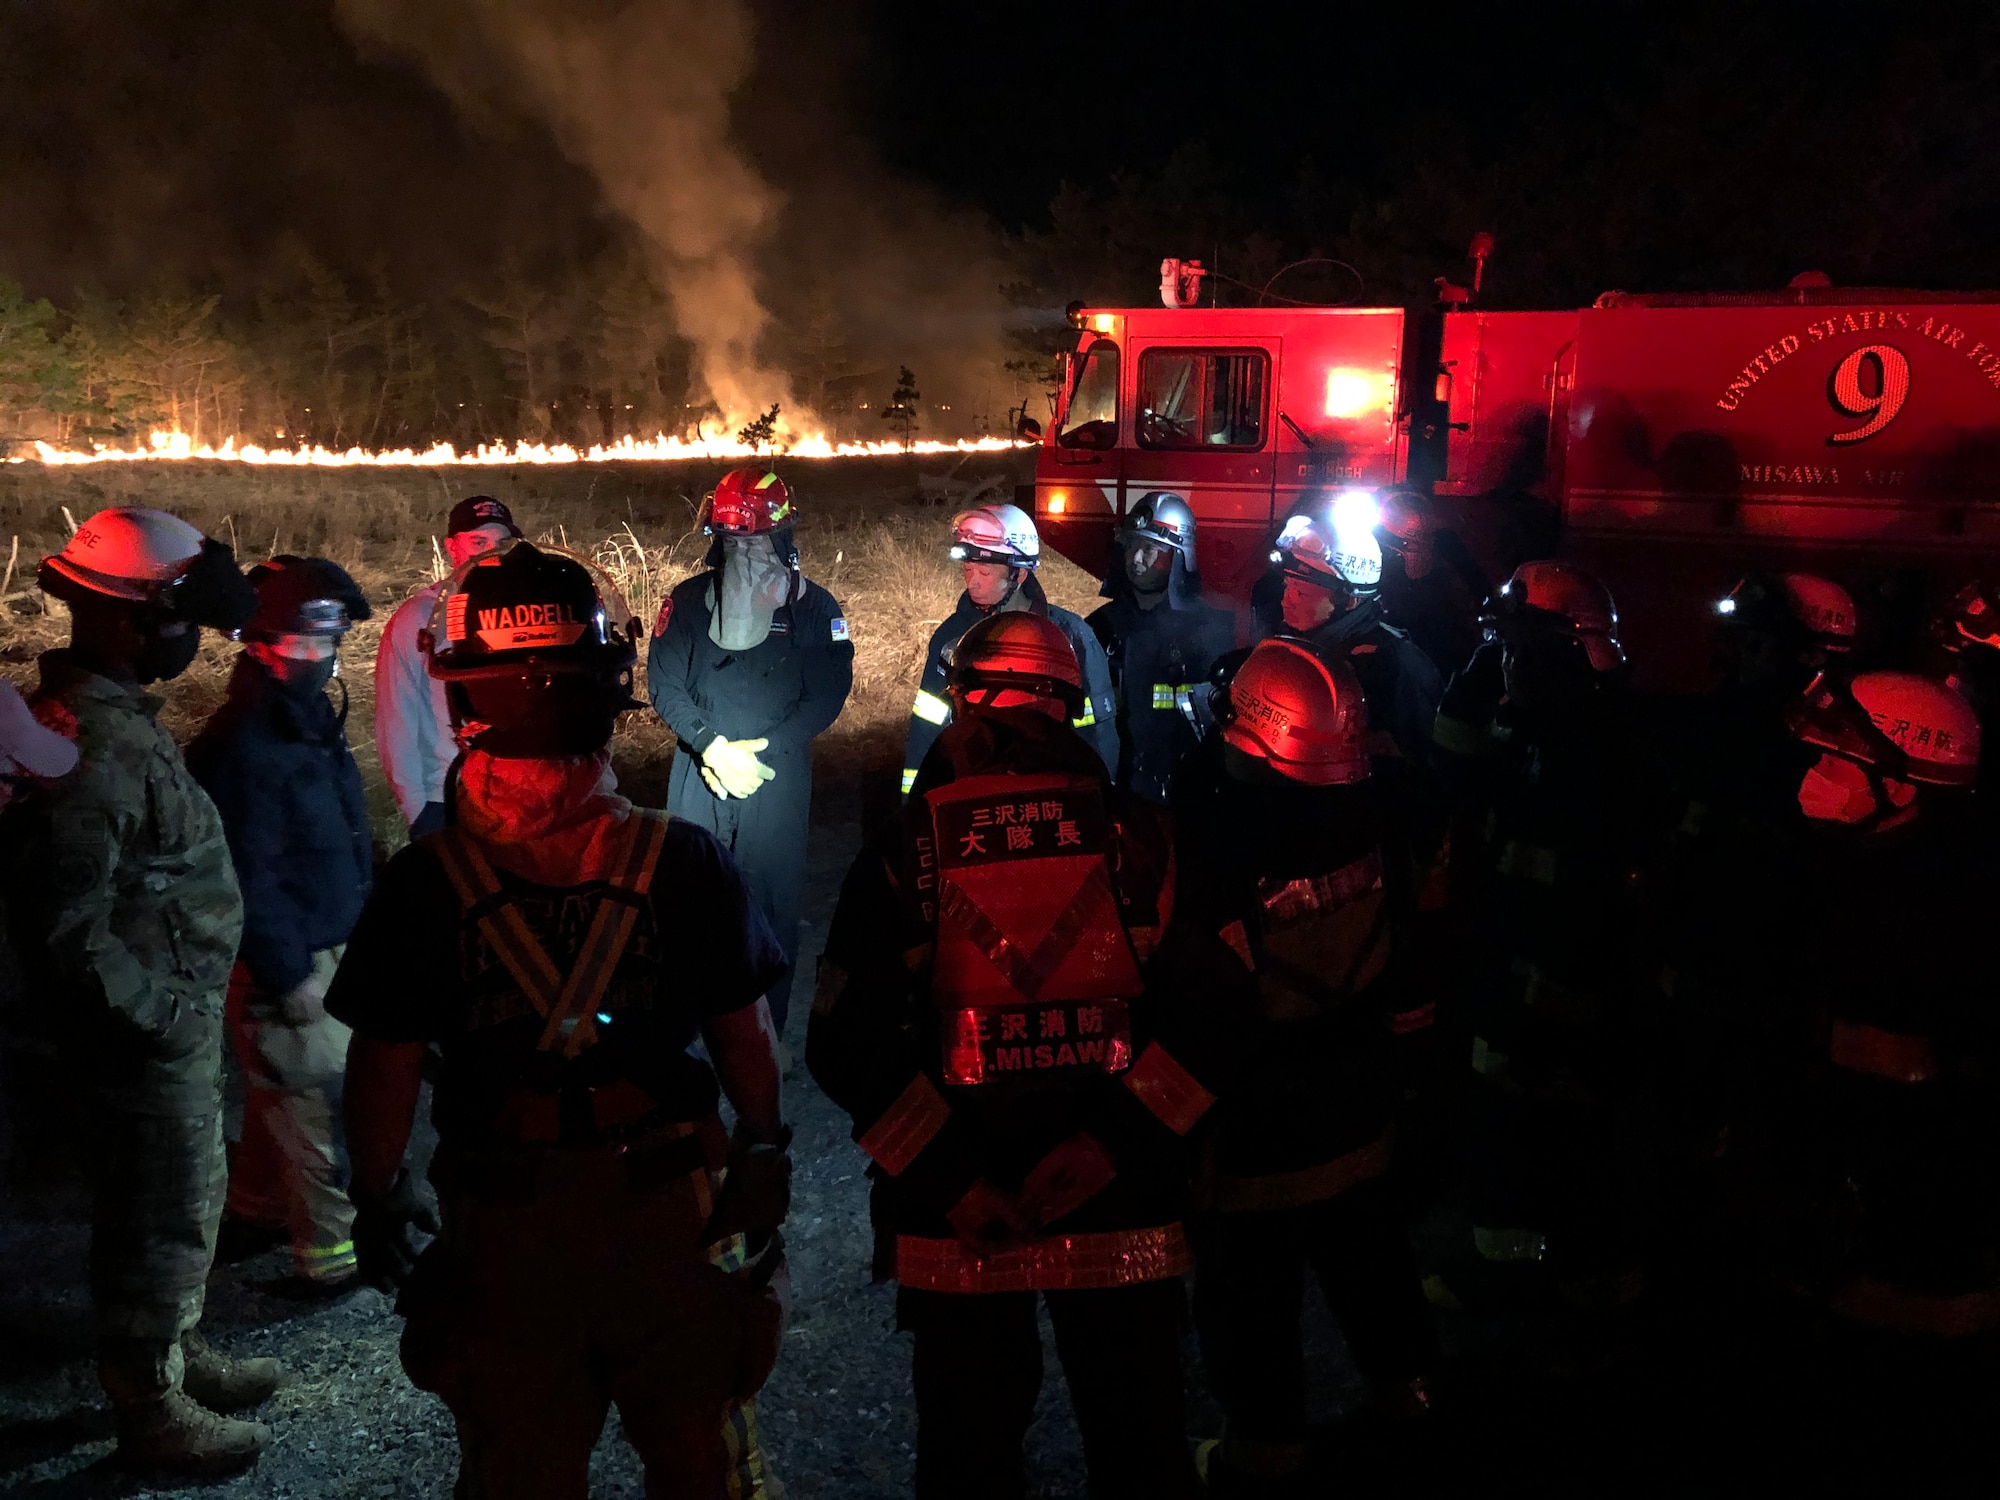 Fire crews stand near a fire truck and fire in a field